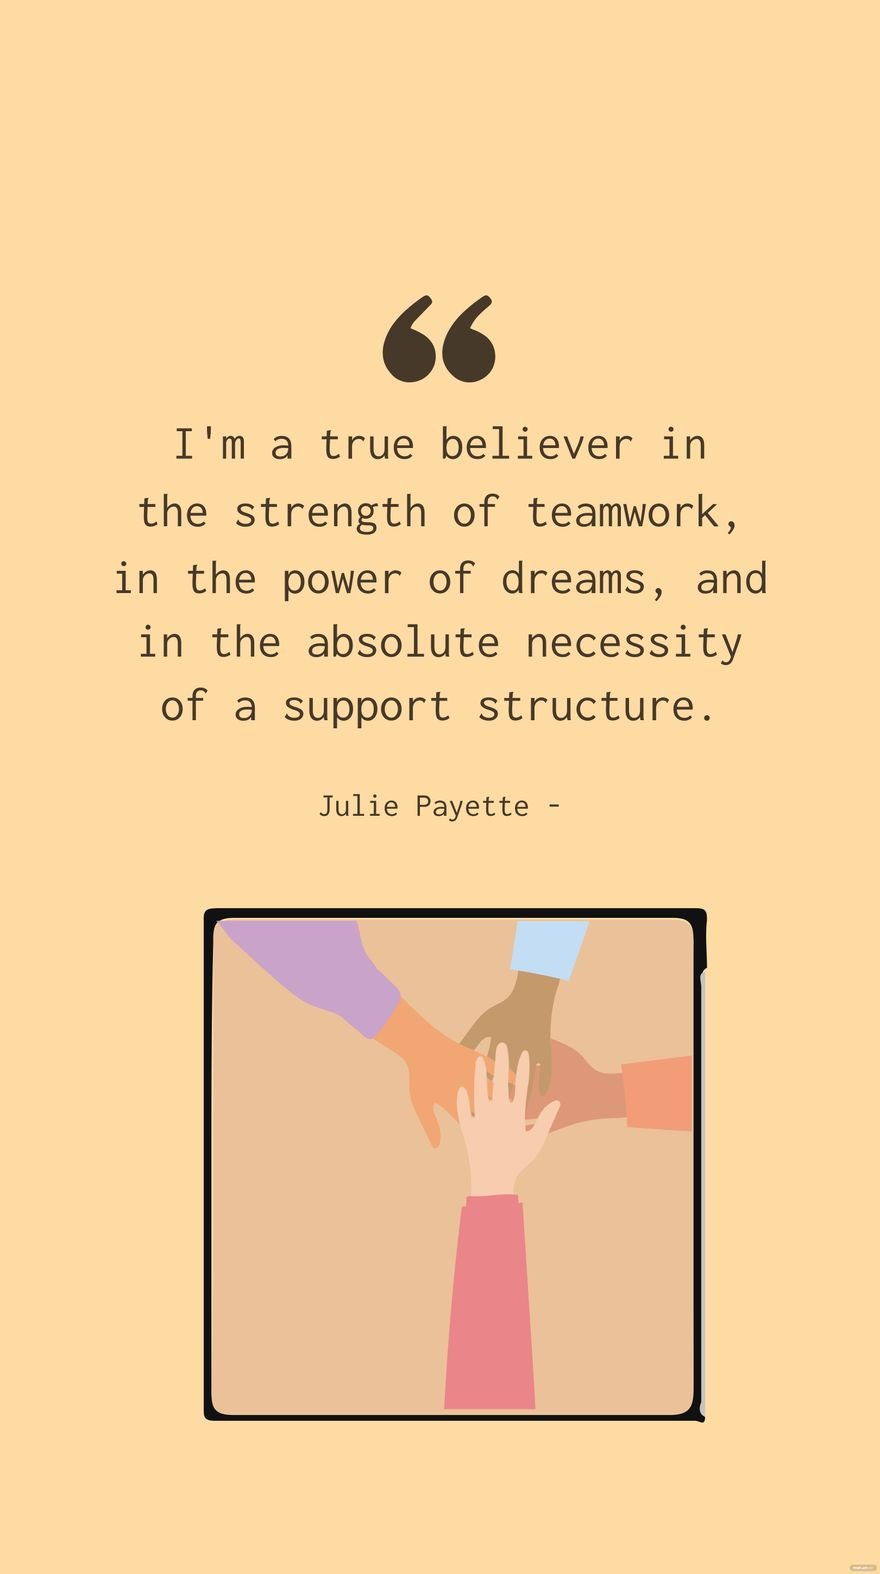 Julie Payette - I'm a true believer in the strength of teamwork, in the power of dreams, and in the absolute necessity of a support structure. in JPG